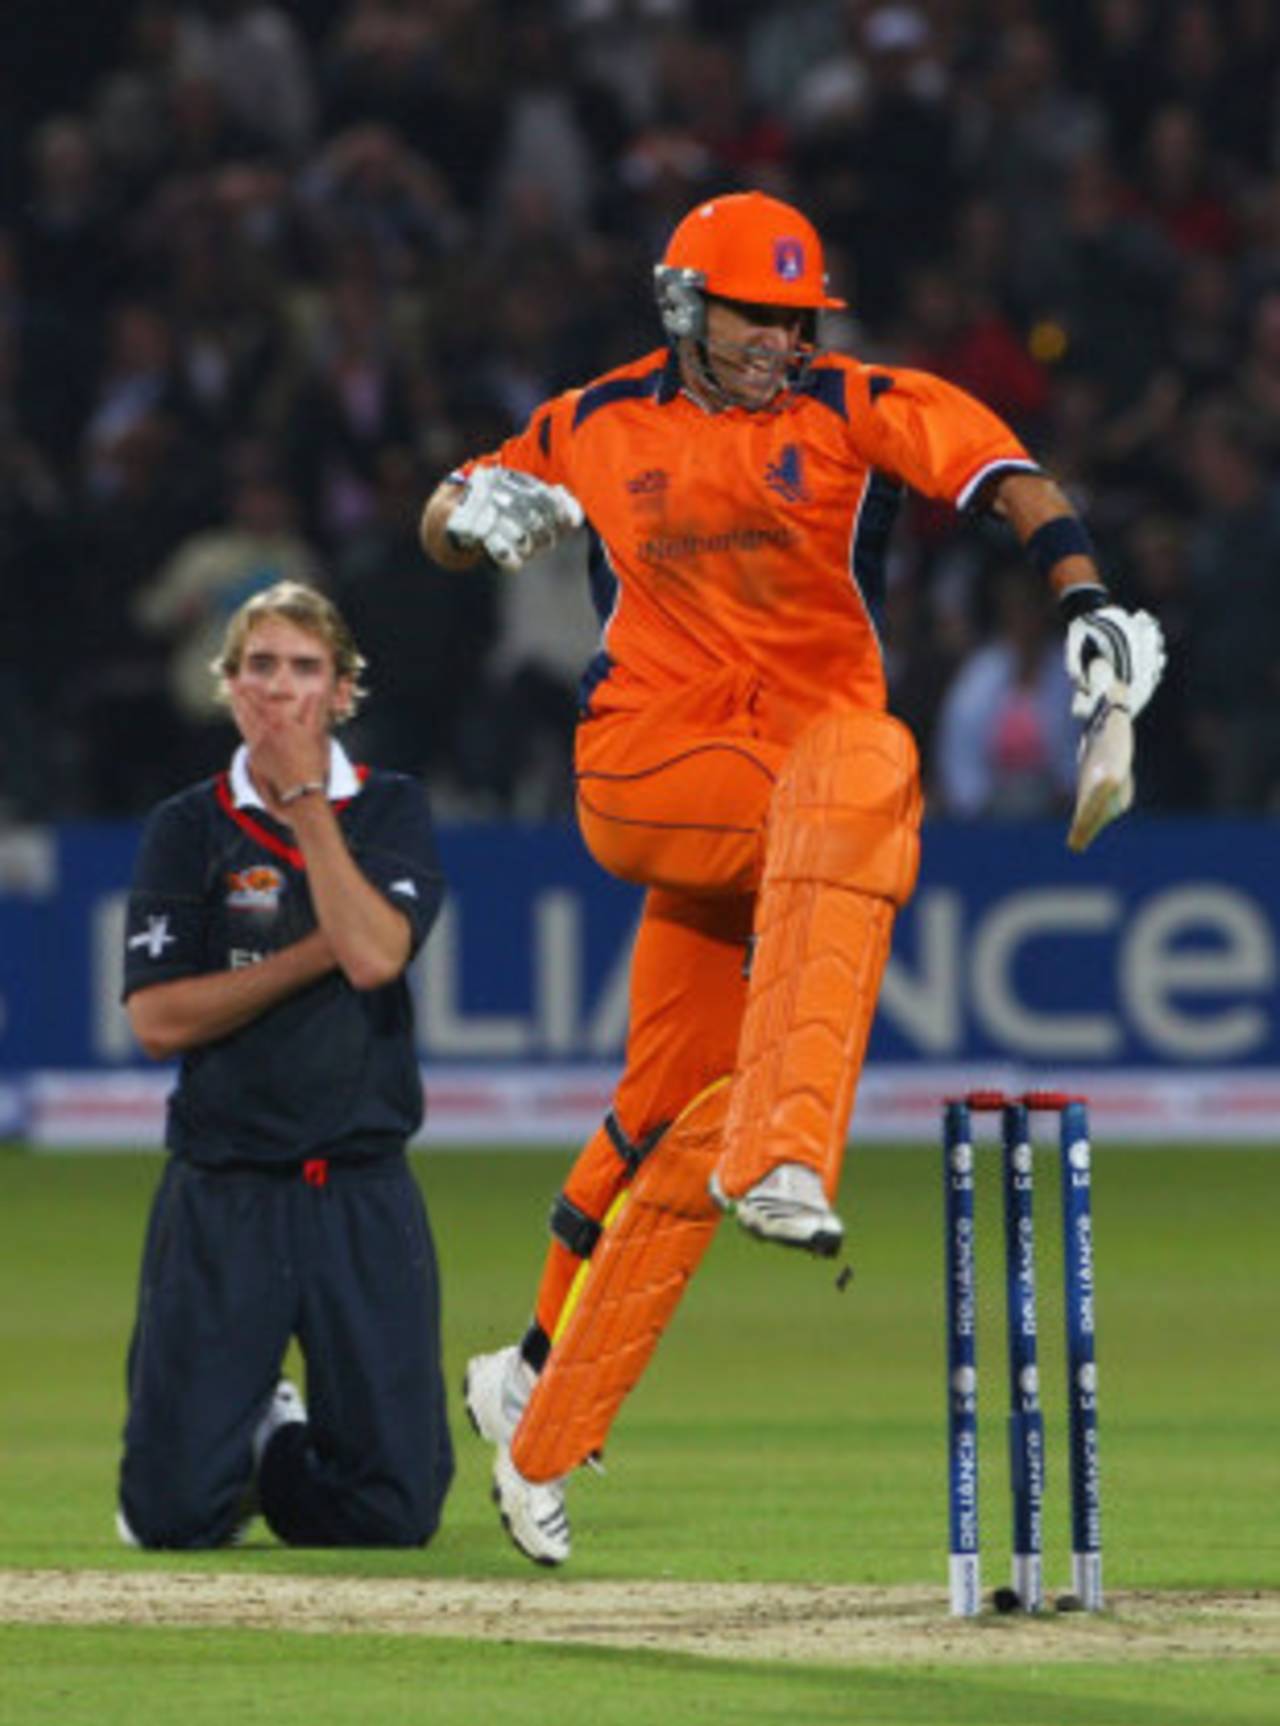 Ryan ten Doeschate celebrates as Stuart Broad sinks to his knees as  Netherlands' seal a dramatic last-ball win, England v Netherlands, ICC World Twenty20, Lord's, June 5, 2009